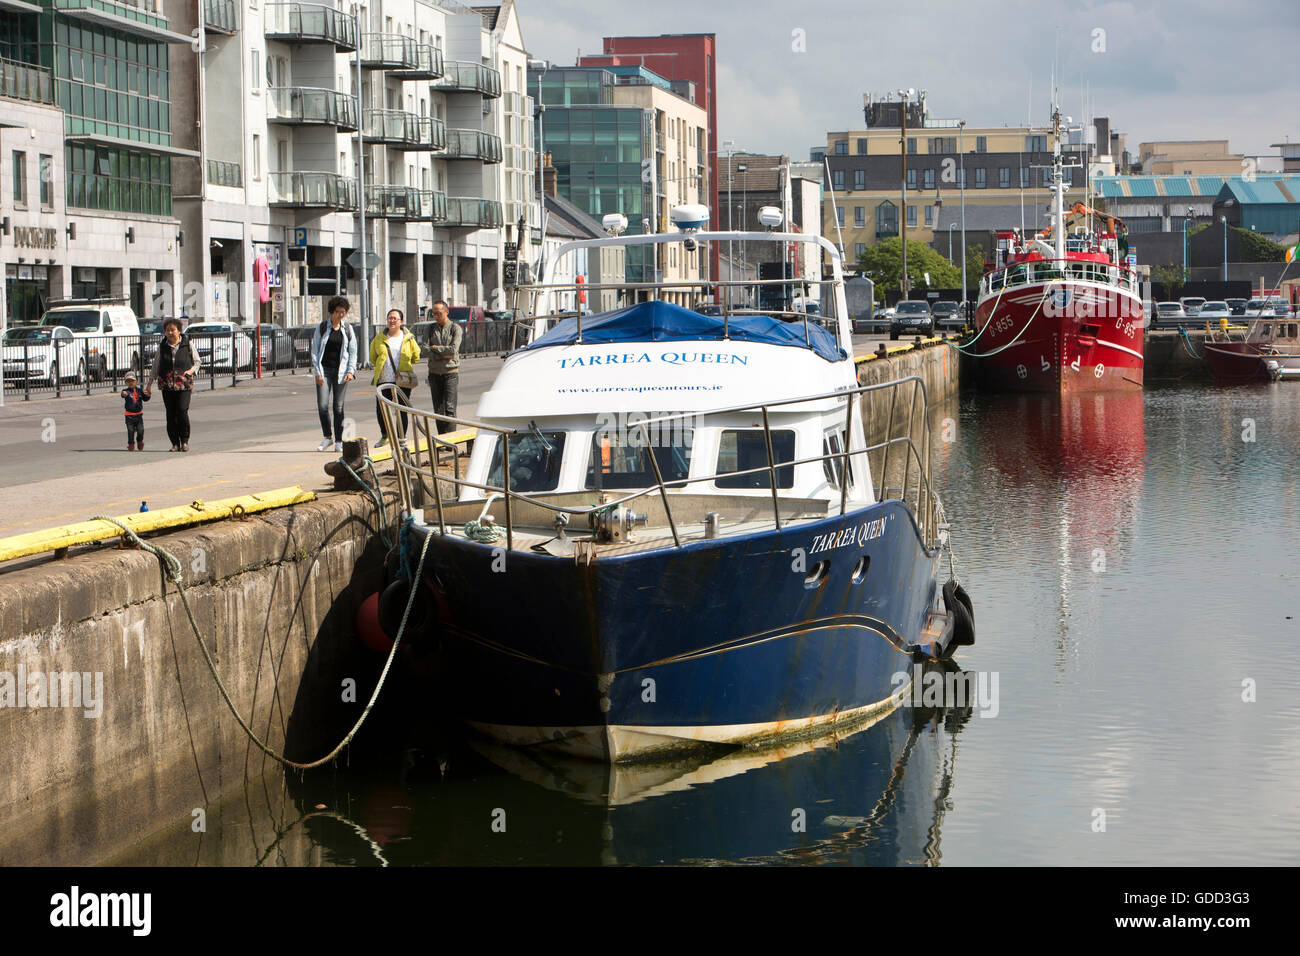 Ireland, Co Galway, Galway, Dock Road, fishing trawler and excursion tour boat Tarrea Queen moored in Dock No 1 Stock Photo